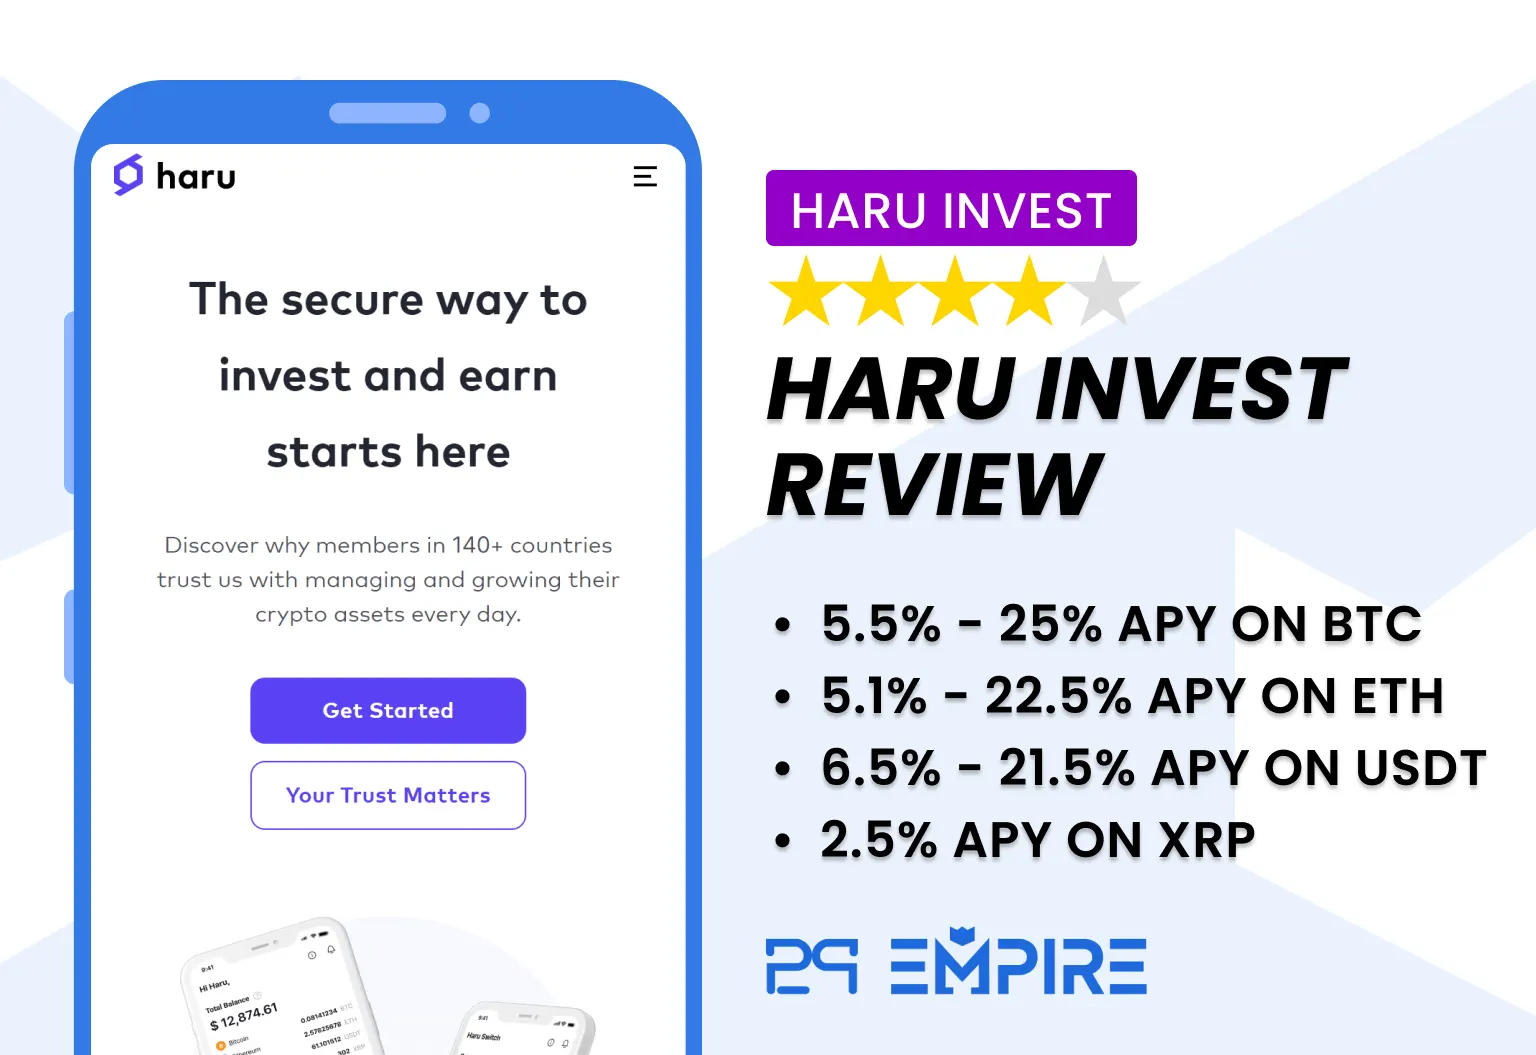 haru invest review